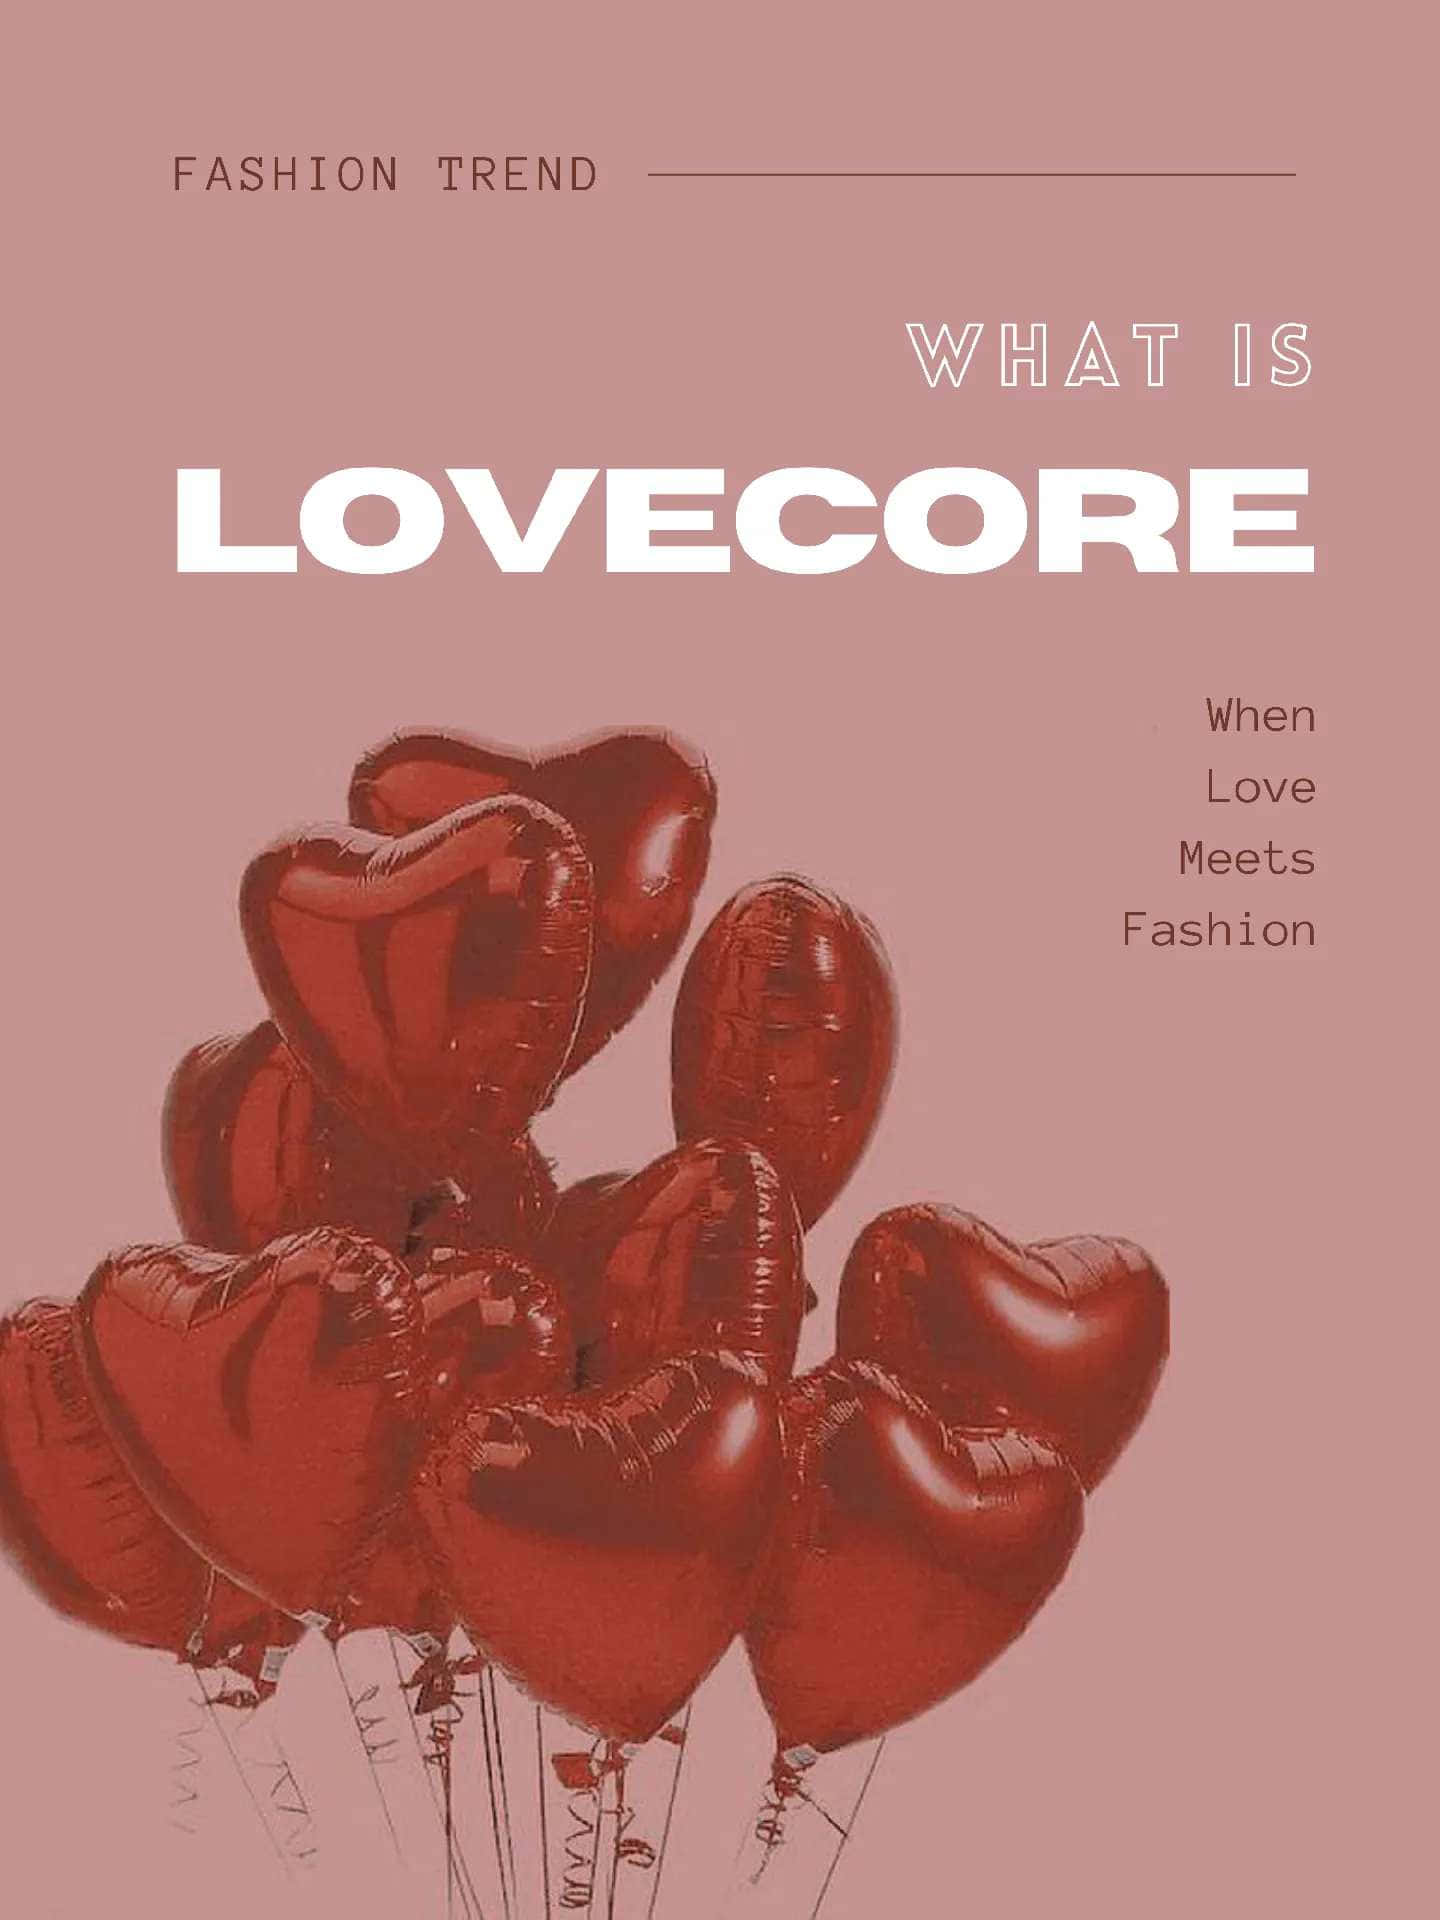 Lovecore Fashion Trend Balloons